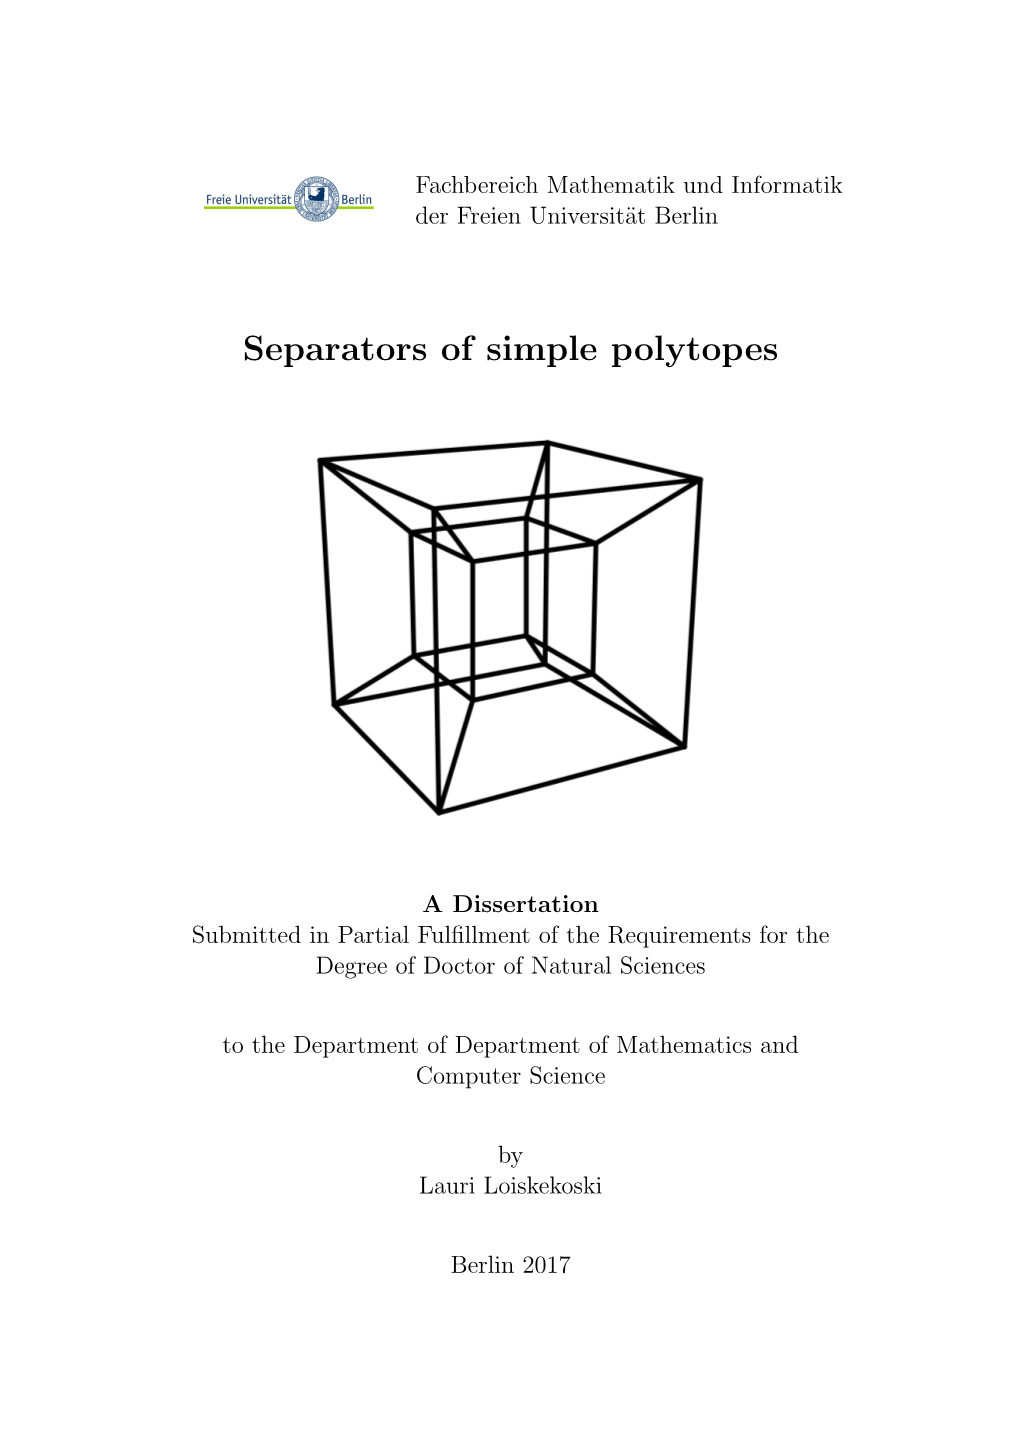 Separators of Simple Polytopes